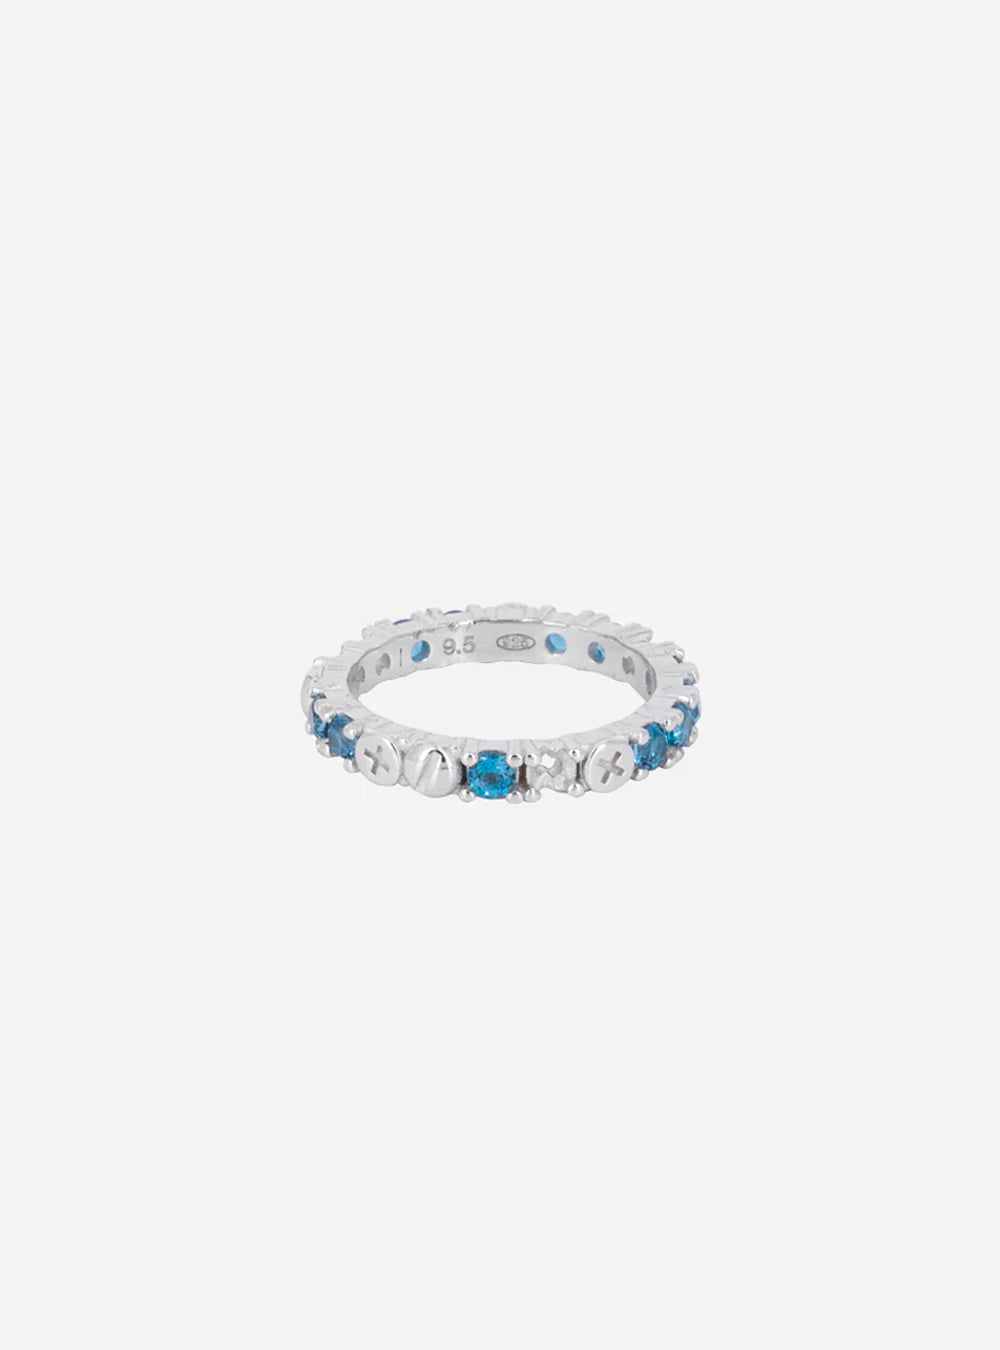 a MIDNIGHTFACTORY white gold ring with blue topaz and diamonds.